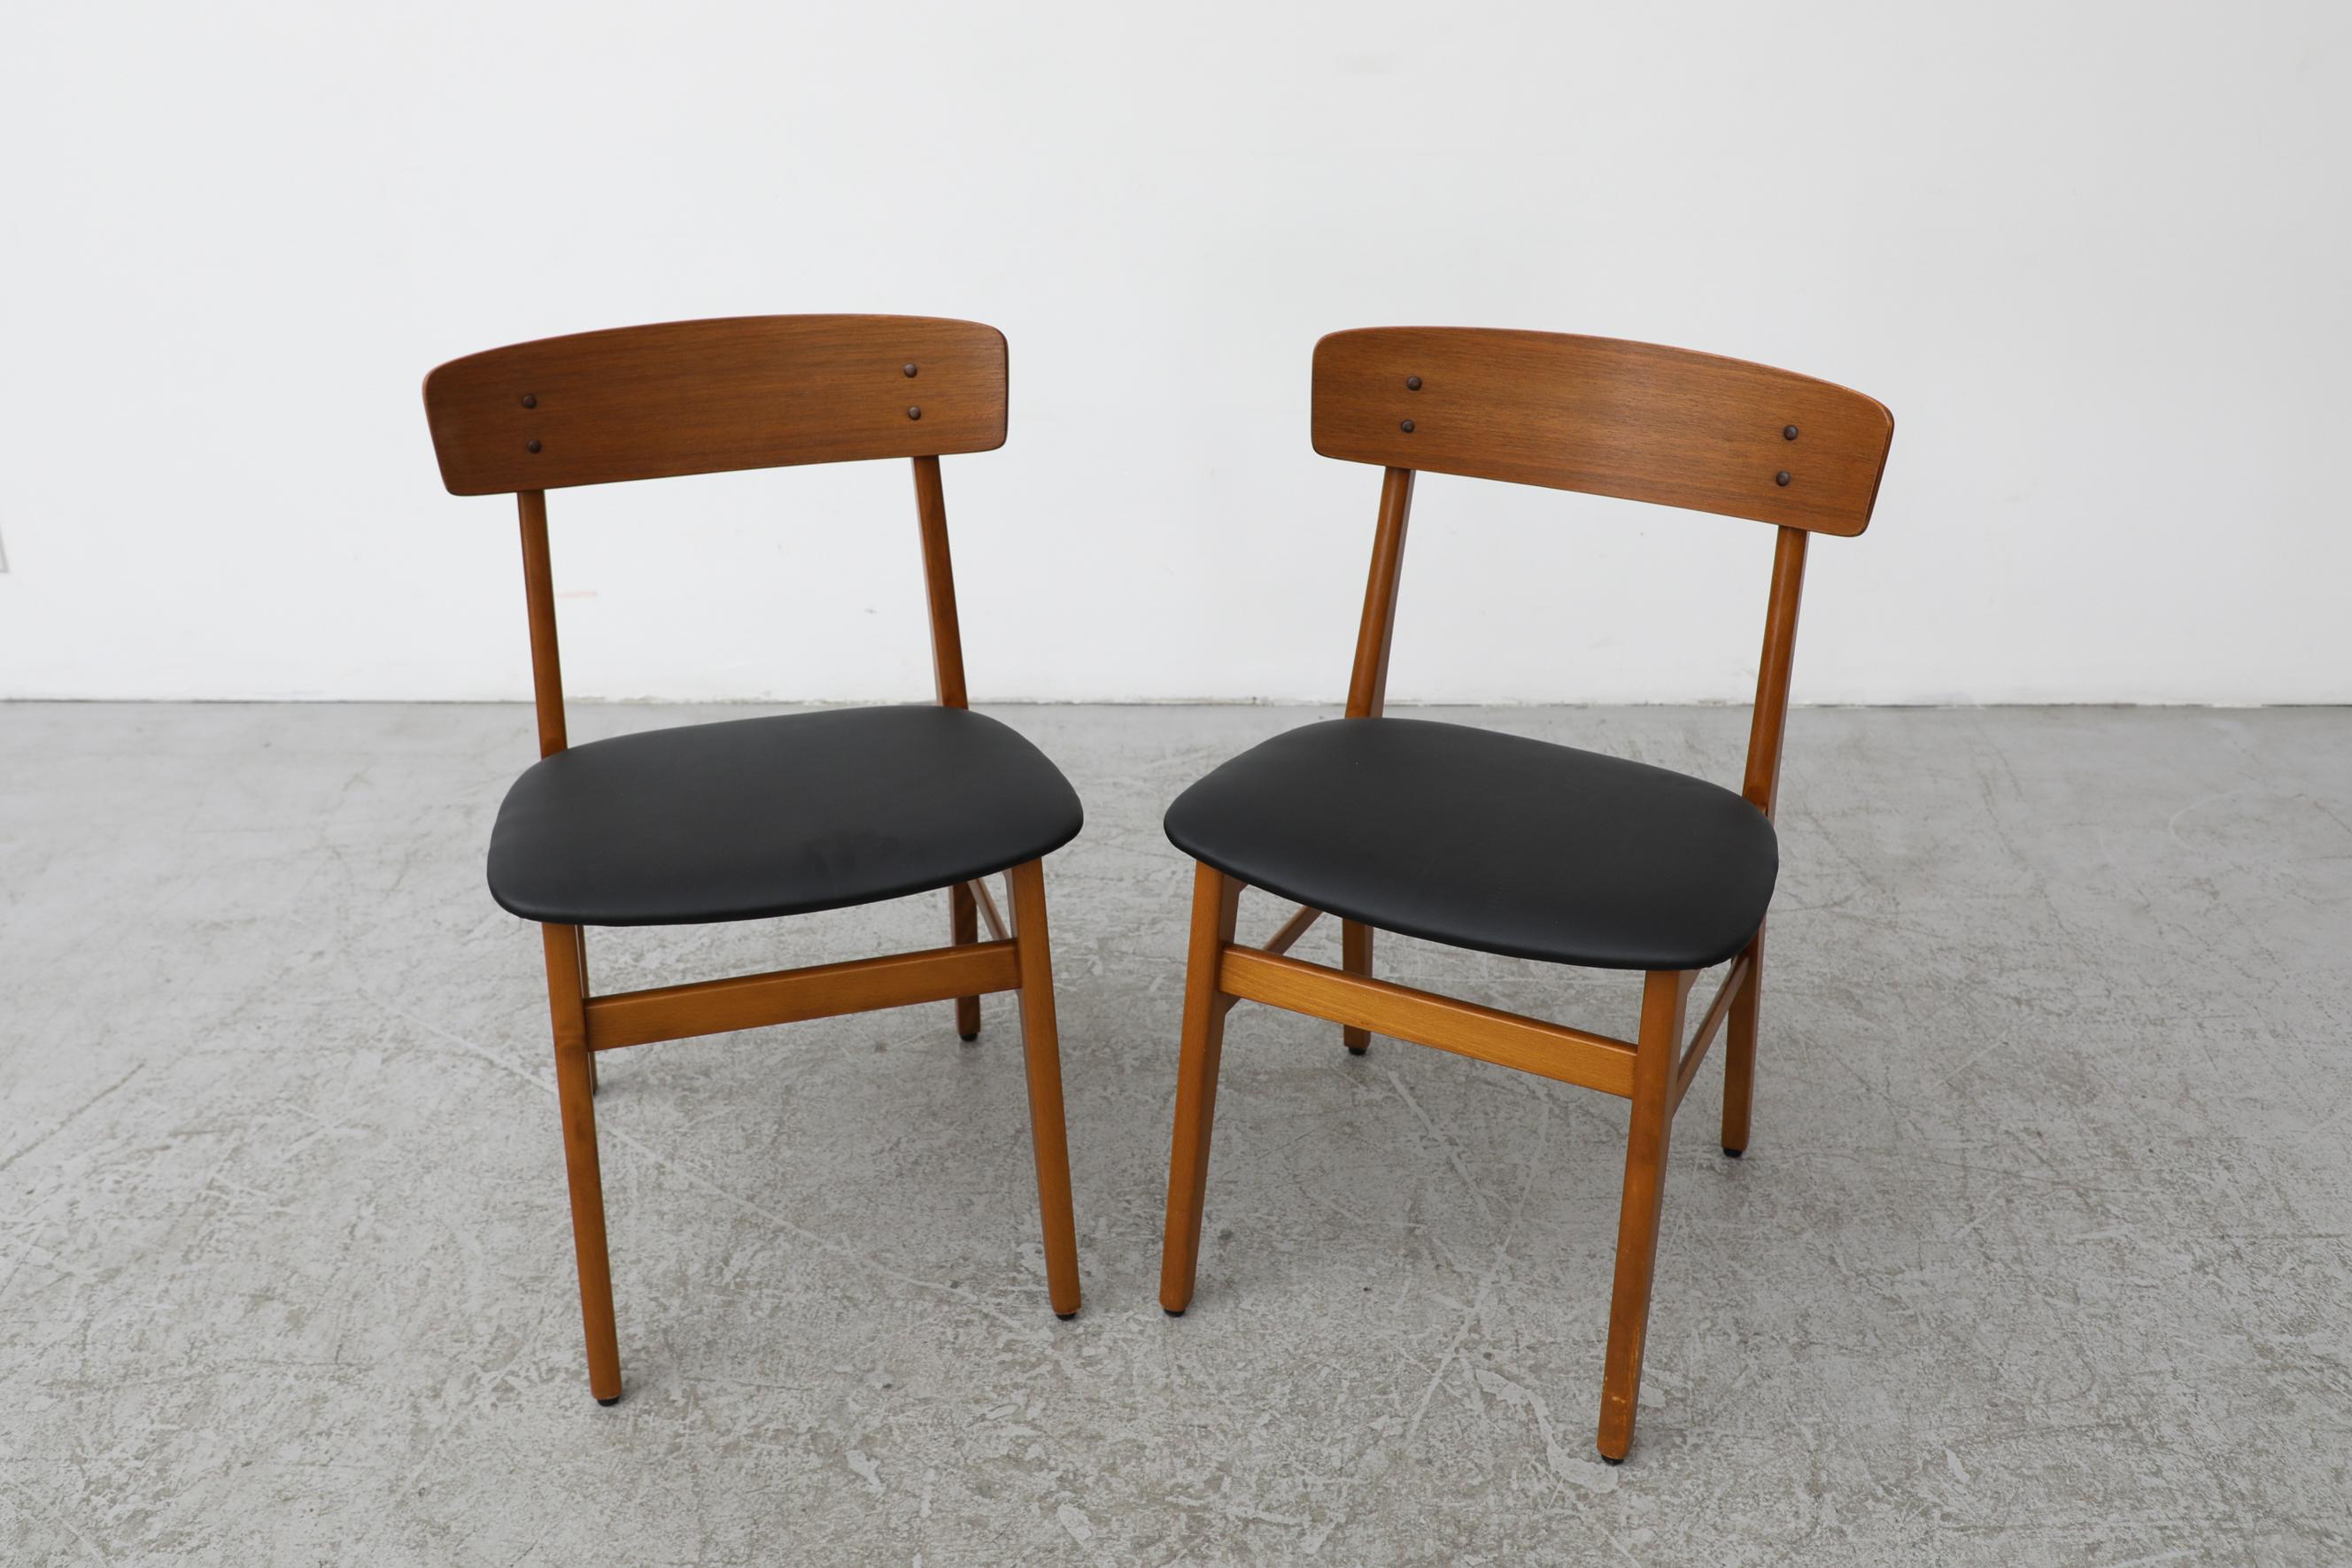 Pair of Borge Mogensen Style Danish Chairs by Farstrup with Black Skai Seats For Sale 2